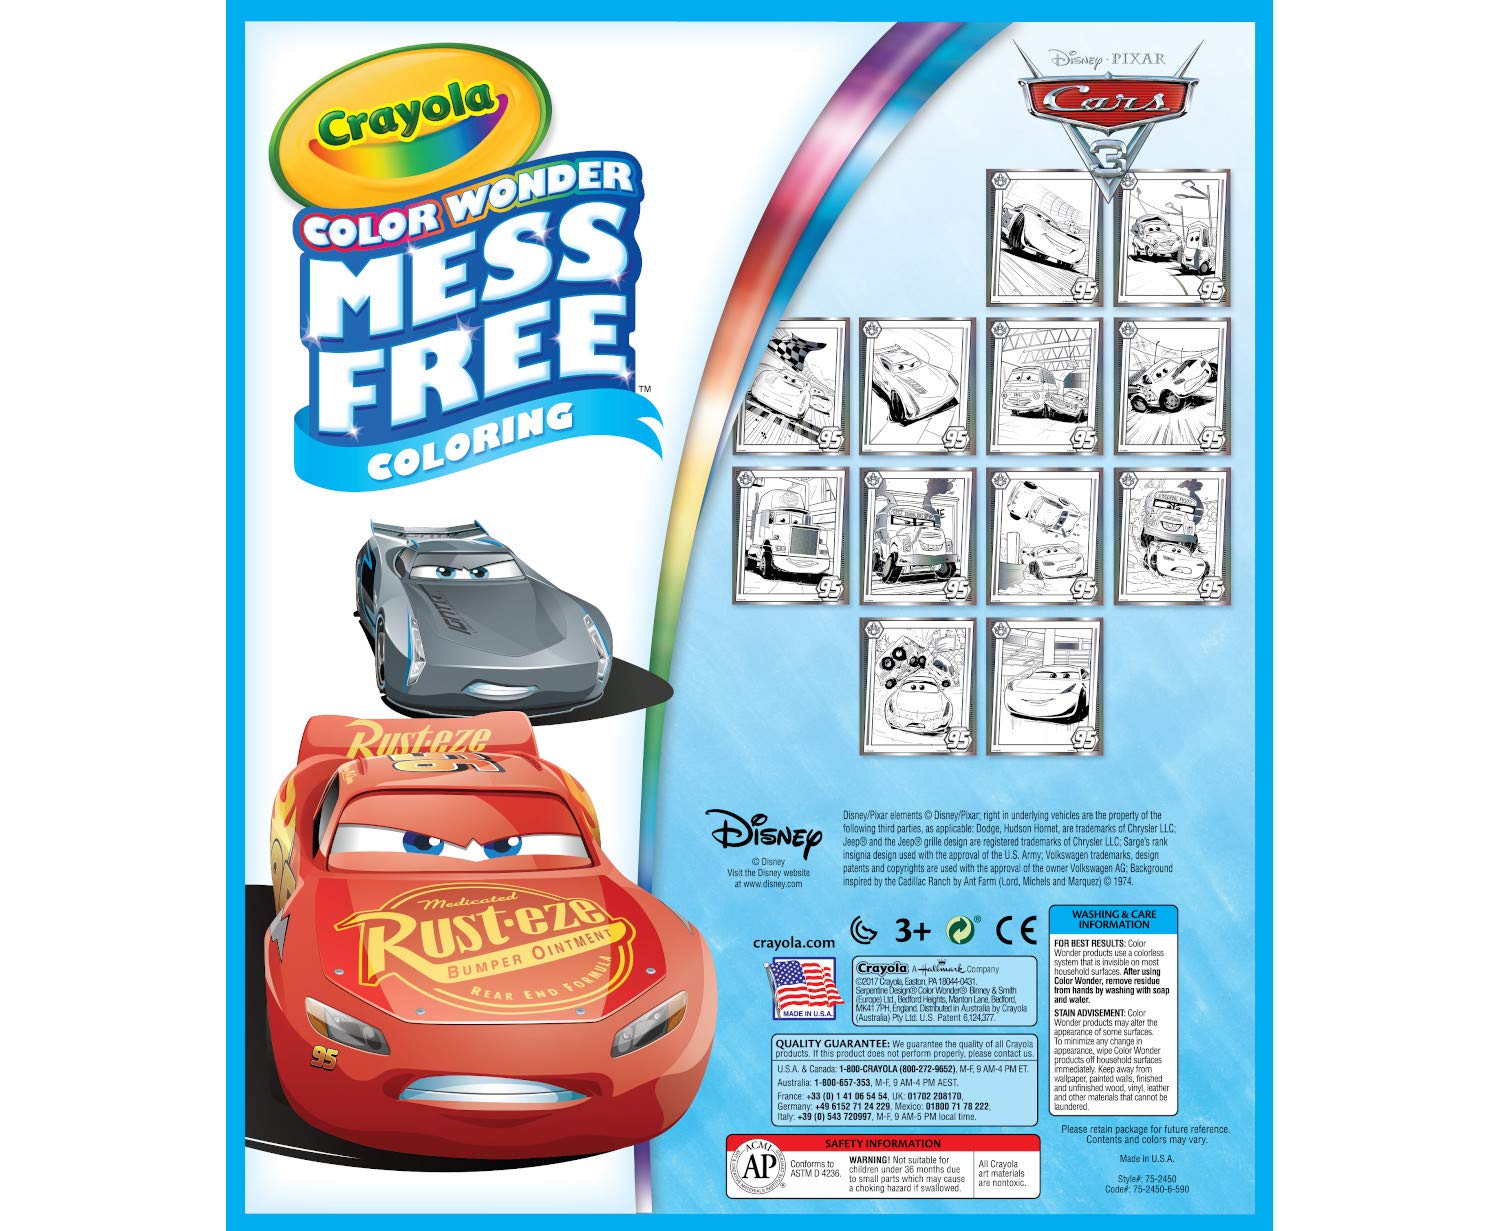 Crayola Cars 3 Color Wonder Set, Mess Free Coloring, Metallic Coloring Pages & Markers